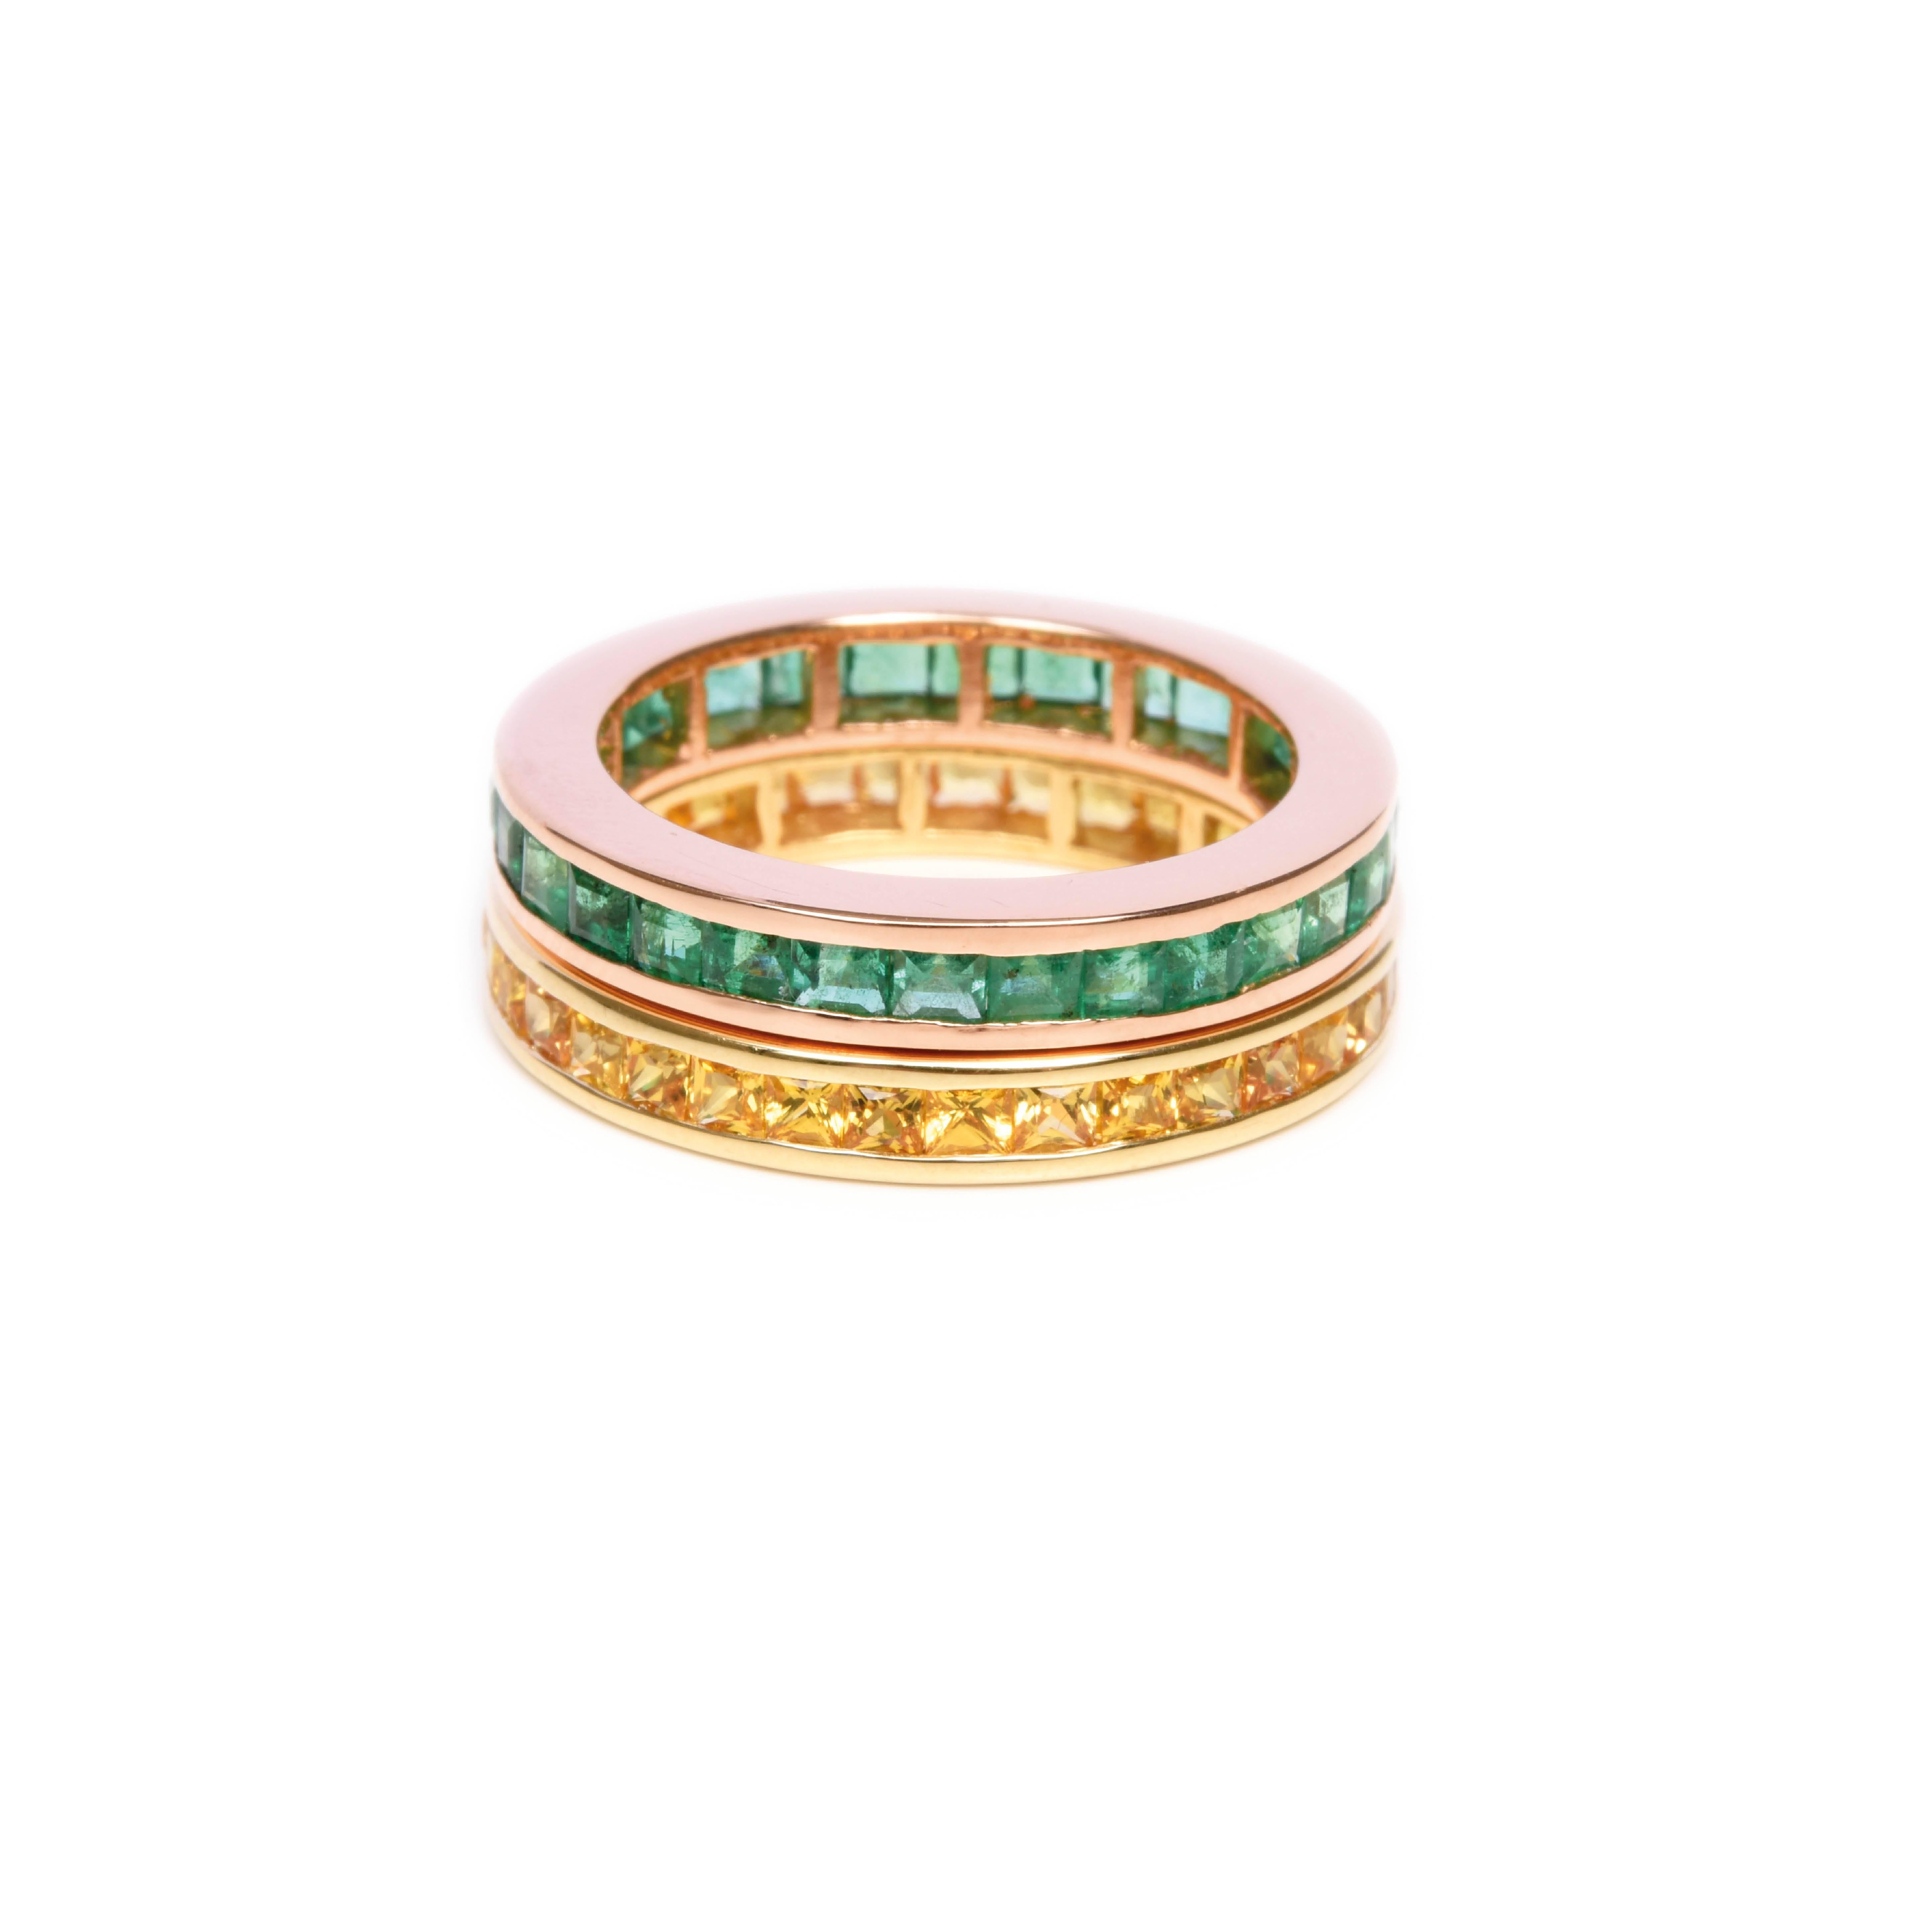 Eternity band ring of invisibly set emeralds in 18 karat yellow or rose gold. 

The delicate band is set with emeralds all the way around to signify eternal love. Crafted in Italy to specified band size.  This bespoke jewel is ready to ship within